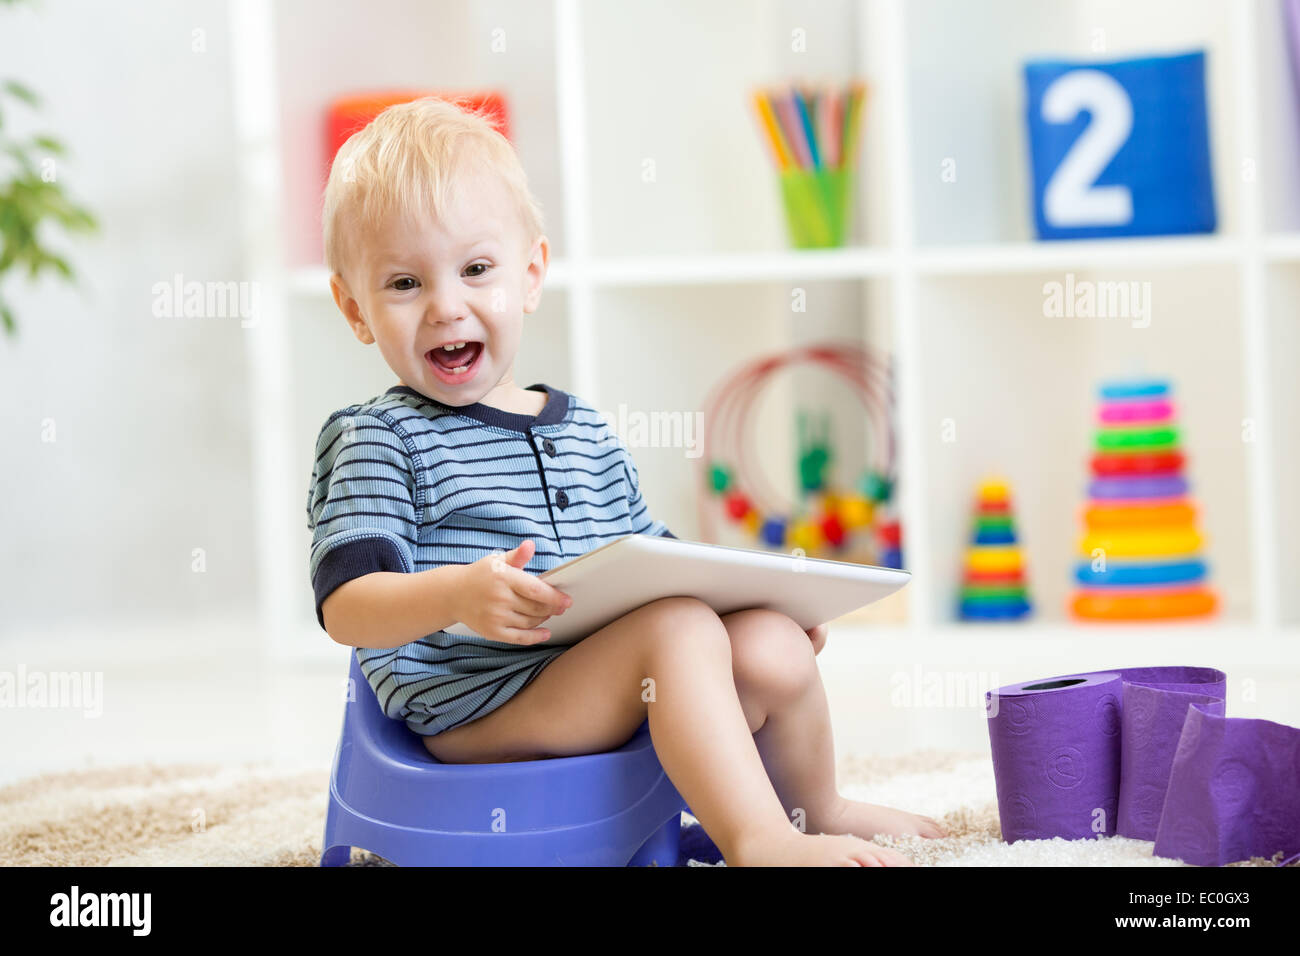 child sitting on chamber pot playing tablet pc Stock Photo